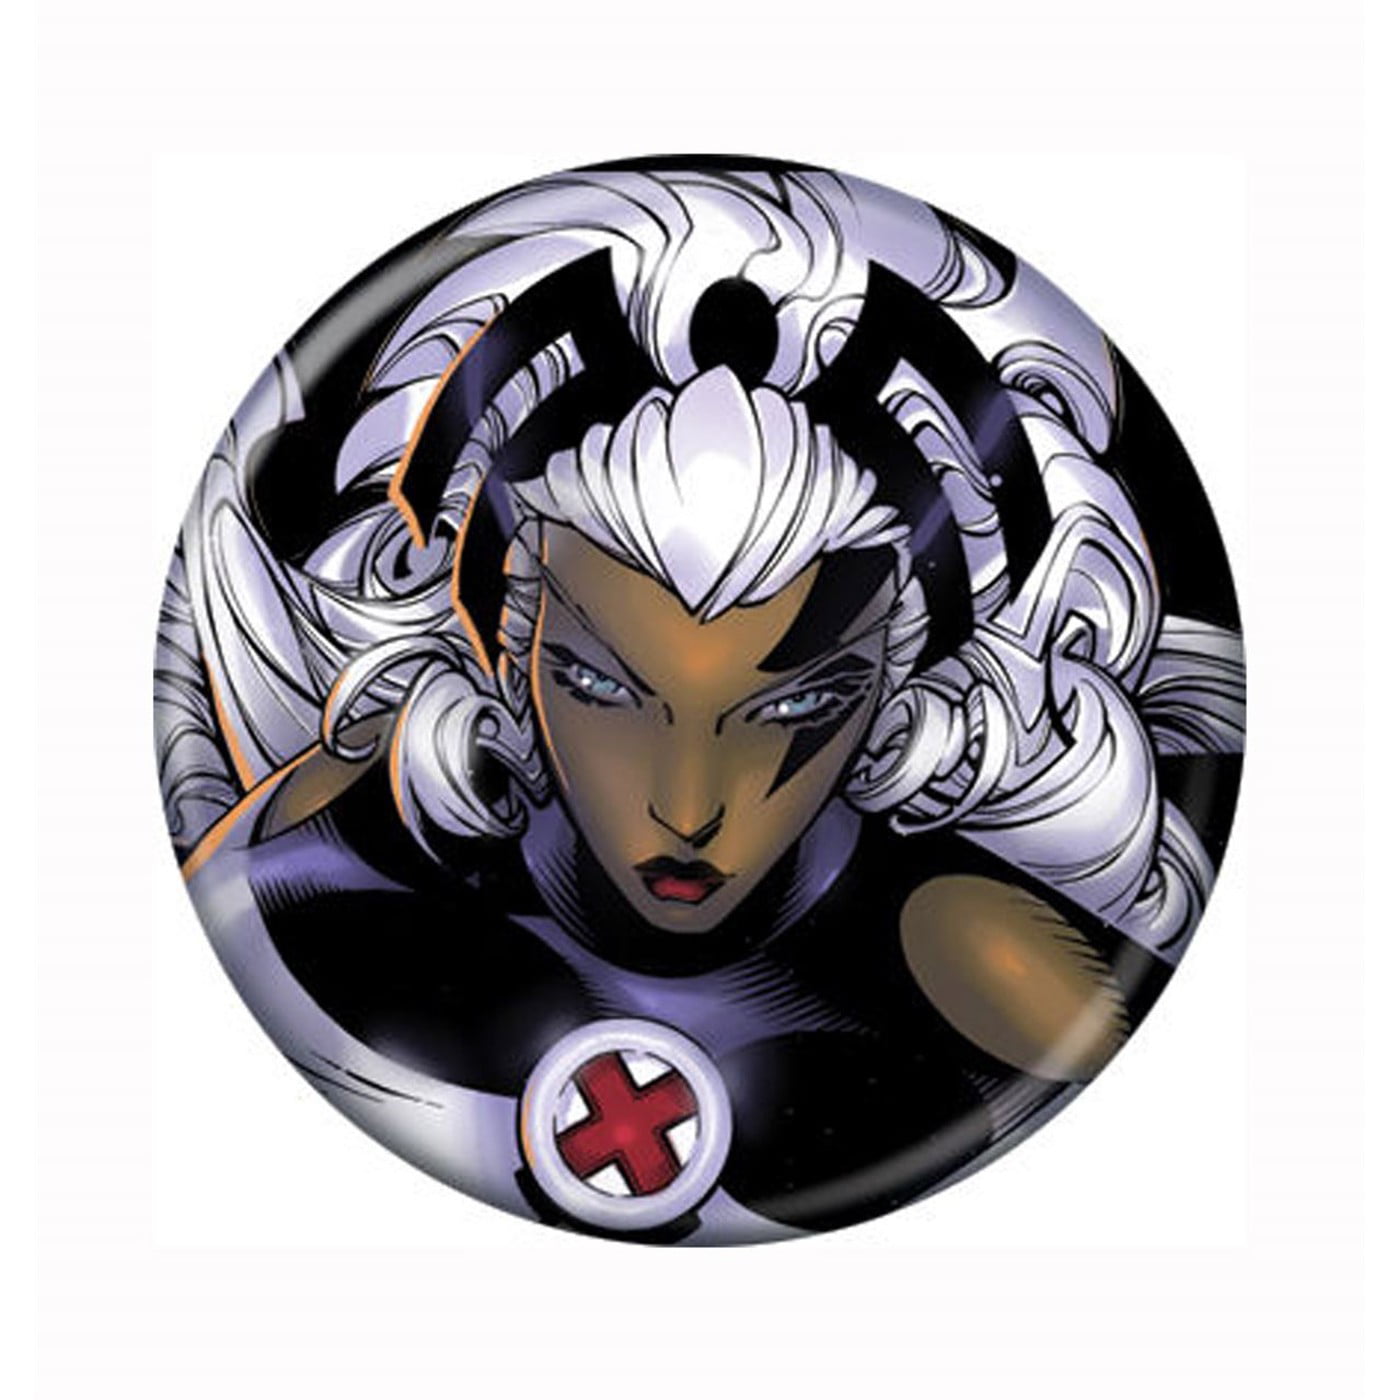 Storm Gifts for Her Storm Jewelry X-men Necklace Gifts for Him Storm Necklace Superhero Necklace X-men Jewelry Superhero Jewelry